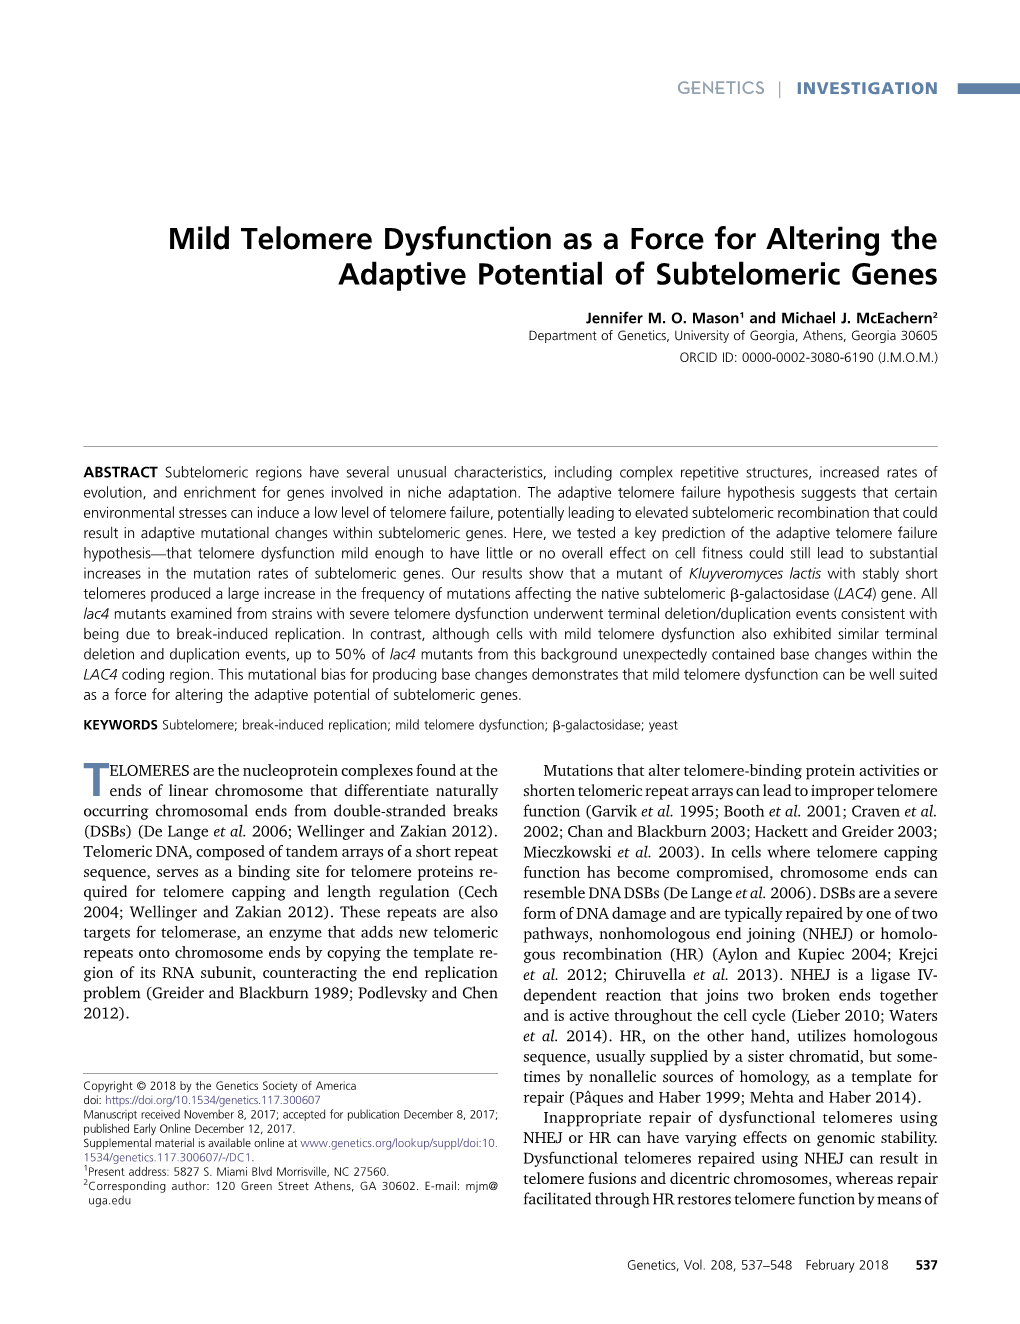 Mild Telomere Dysfunction As a Force for Altering the Adaptive Potential of Subtelomeric Genes